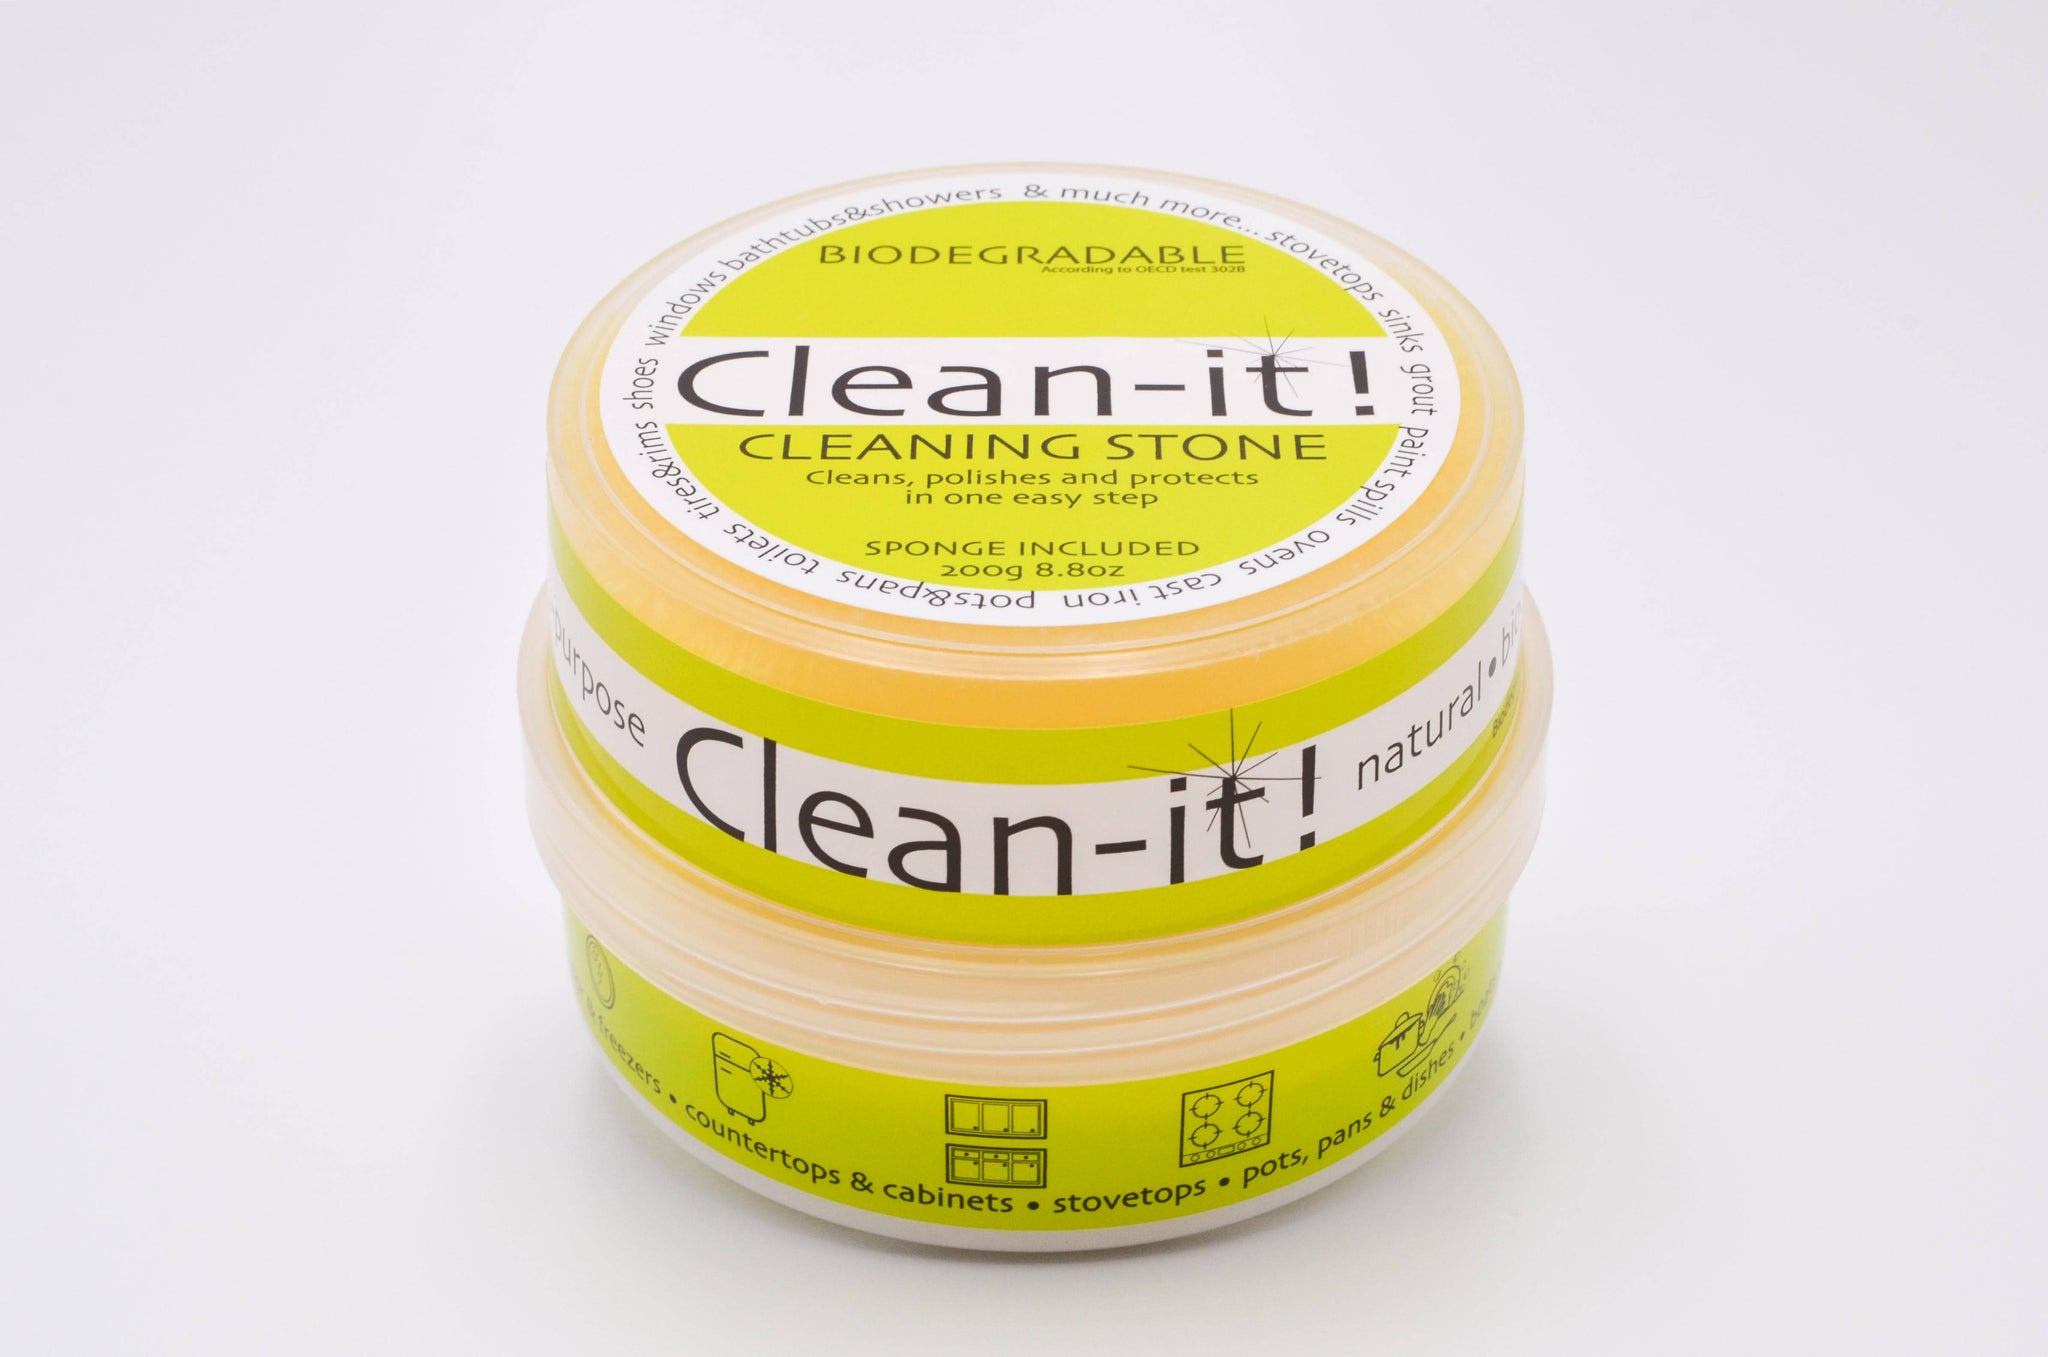 Wet-it! - Clean-it! Multi-Purpose Cleaning Stone